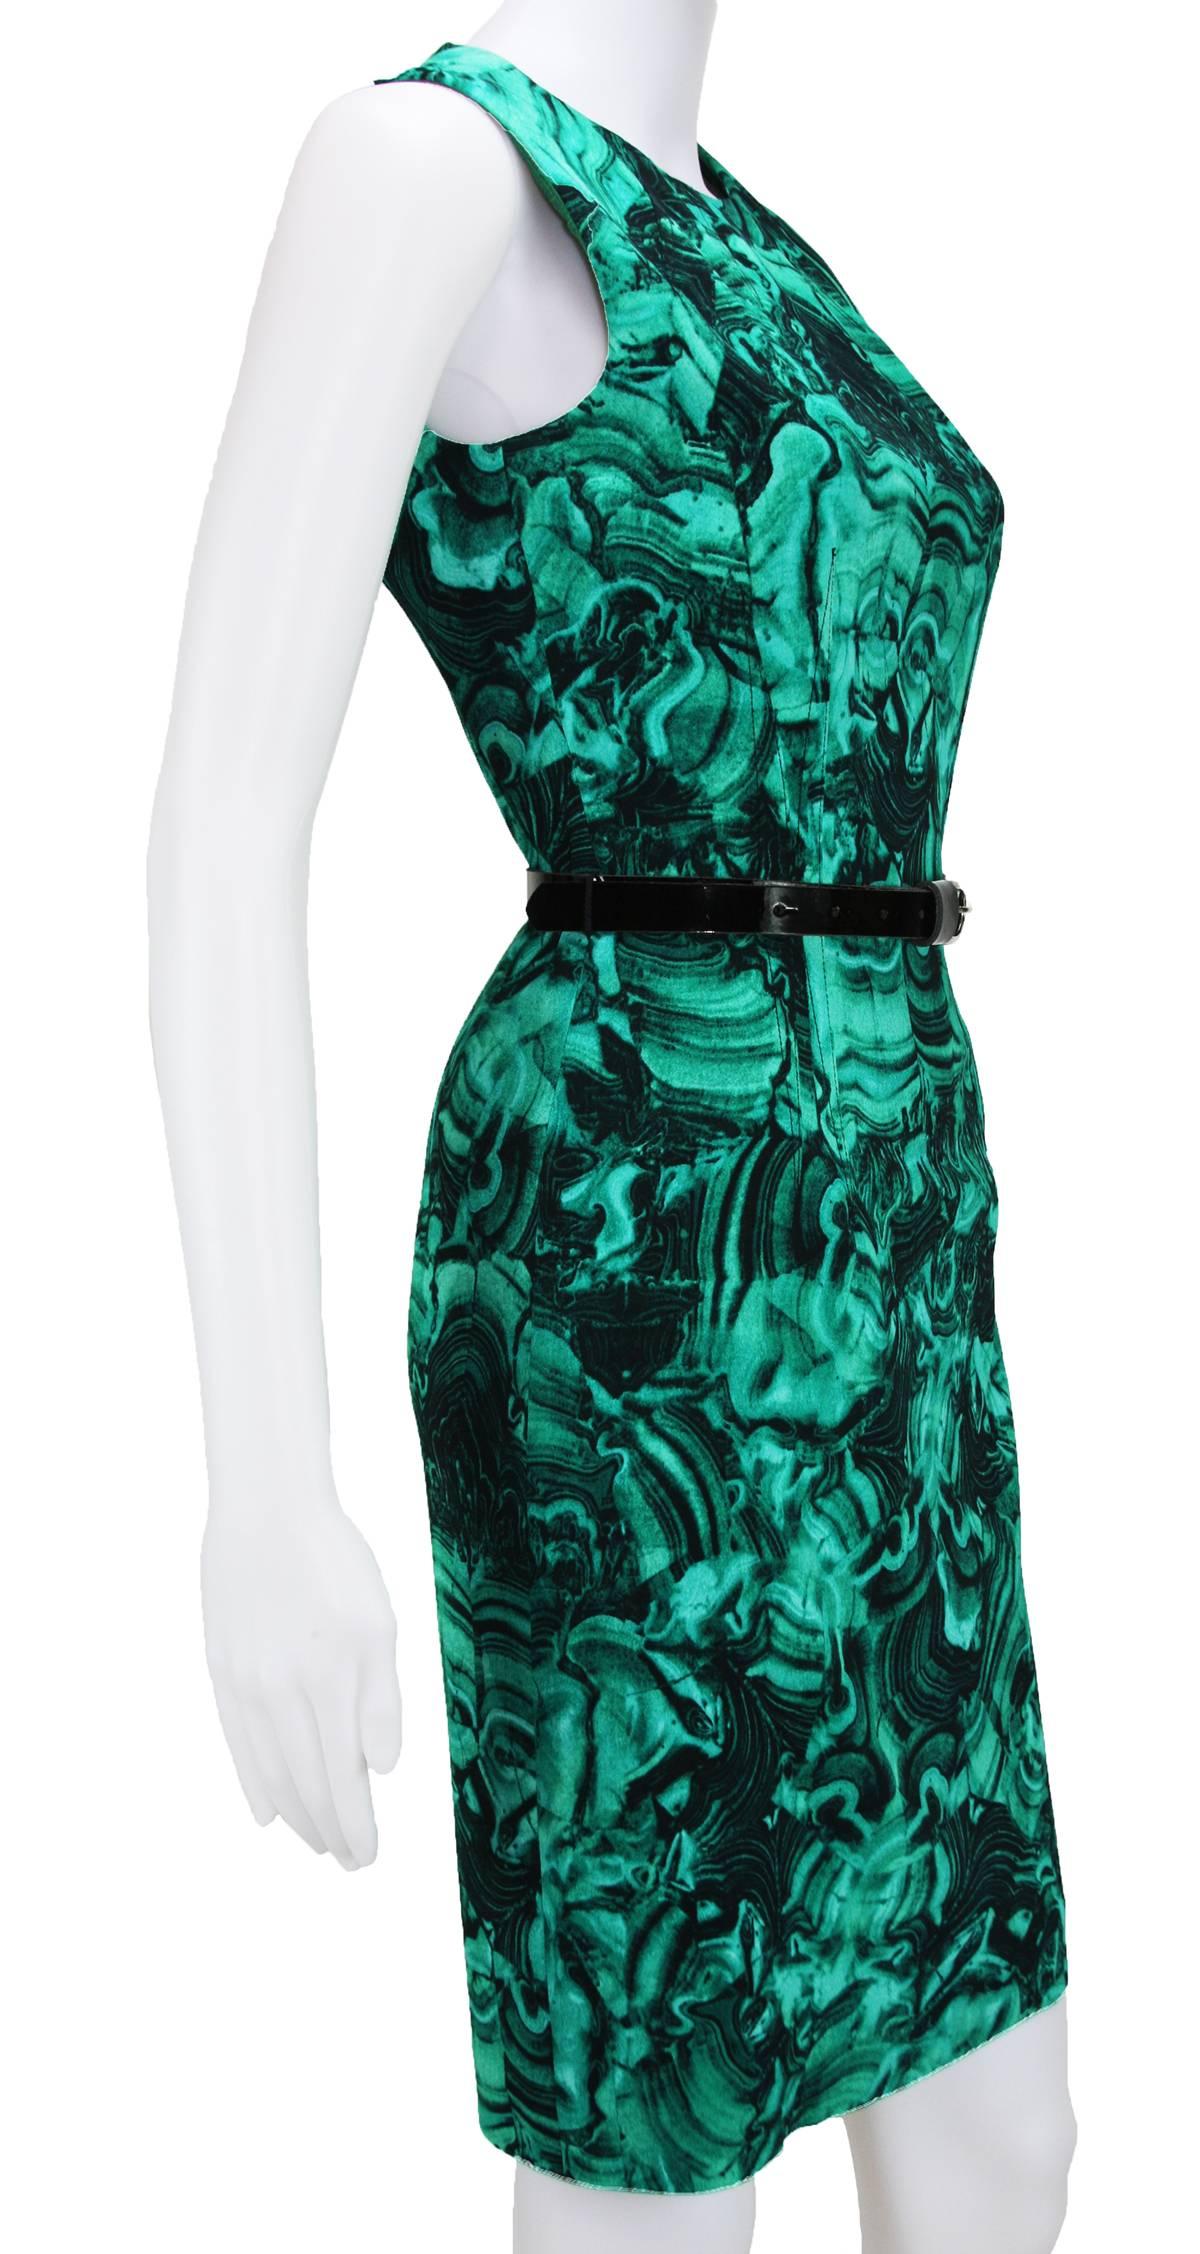 Created from the Fabric of TONY DUQUETTE'S Iconic Malachite Pattern.
2009 Collection
Size - 4
Color – Emerald Multi (Green, Black)
Sheath Silhouette
Belted Waist – Black Patent Leather with Silver Tone Buckle
Hidden Back Zip, Sleeveless
Straight